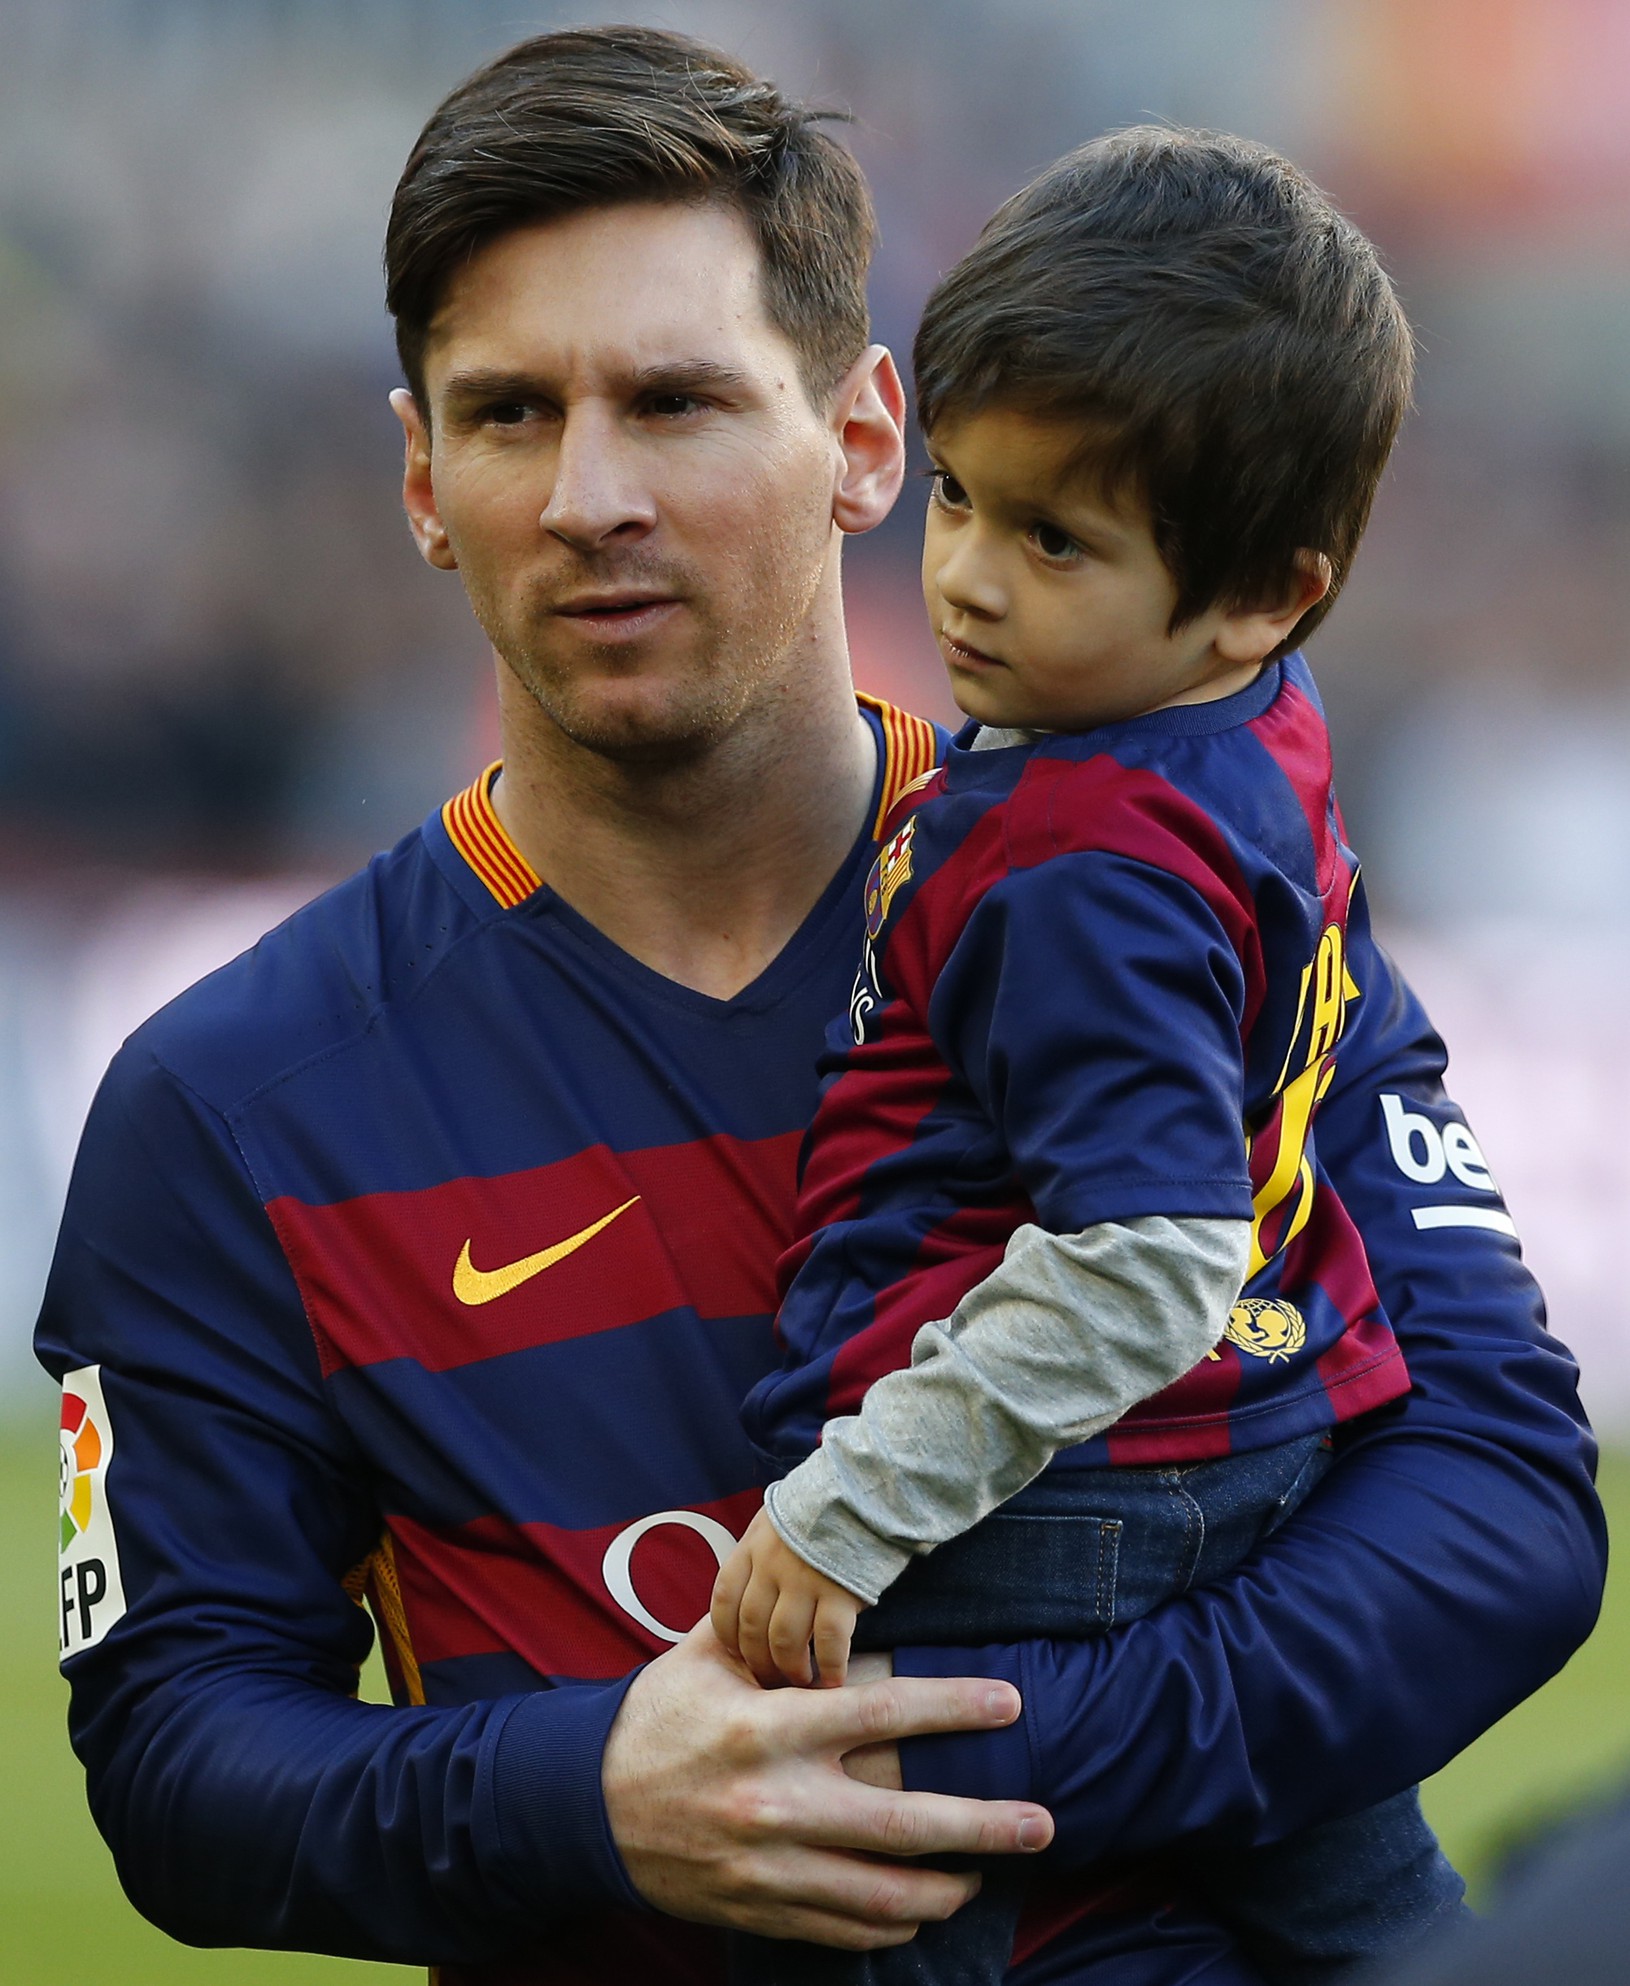 Lionel Messi a syn